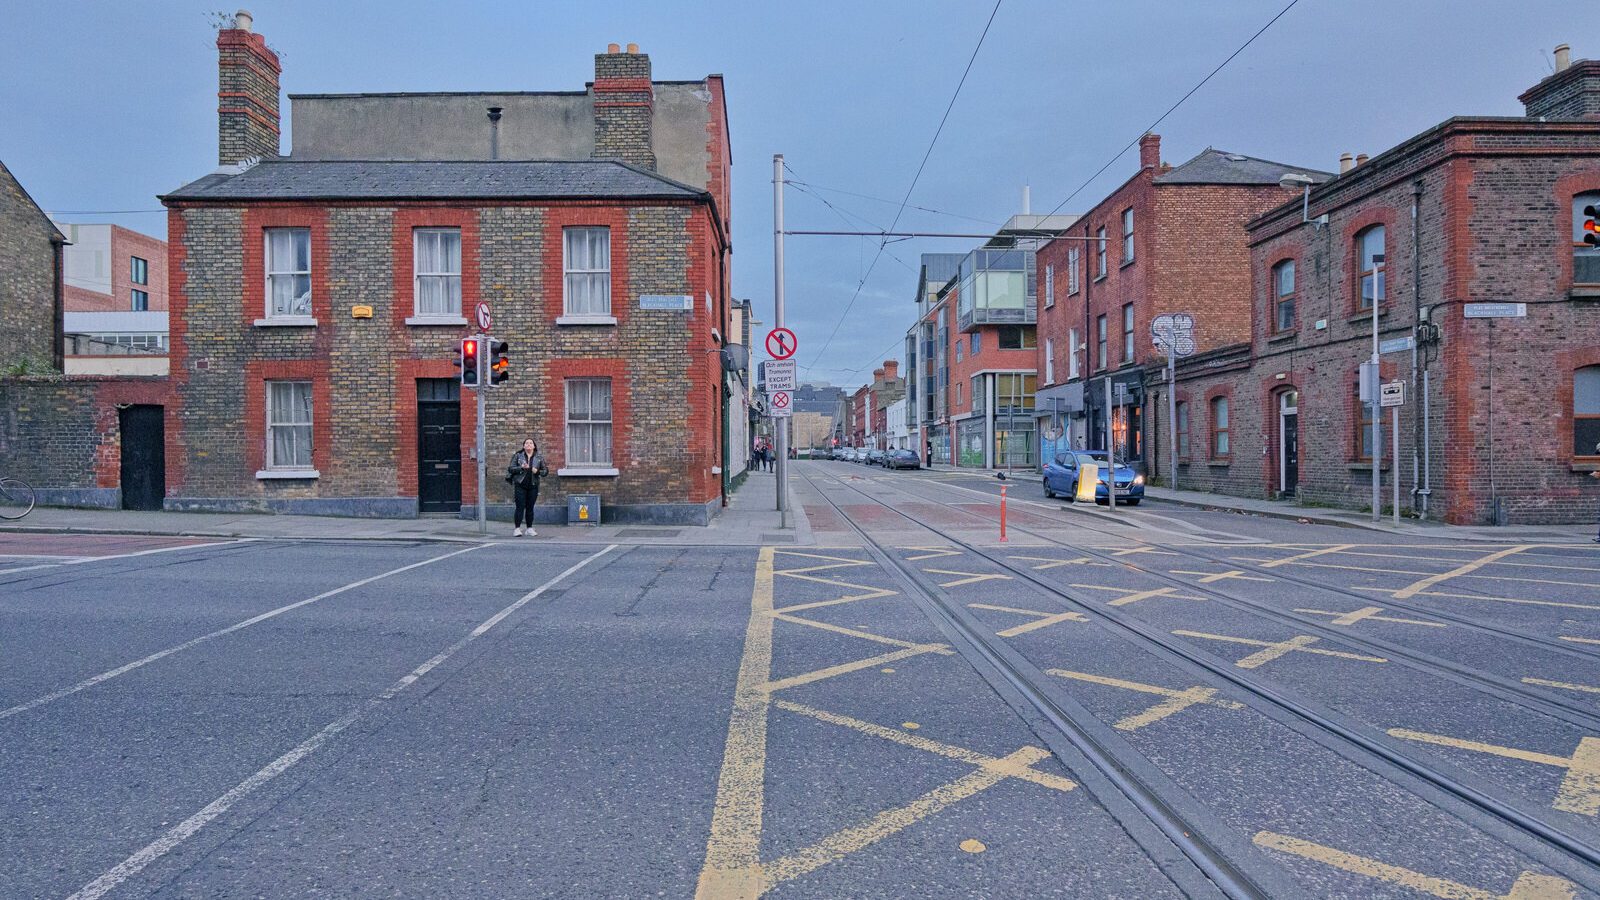 A QUICK VISIT TO BENBURB STREET [IT WAS GETTING DARK AT THE TIME]-226126-1